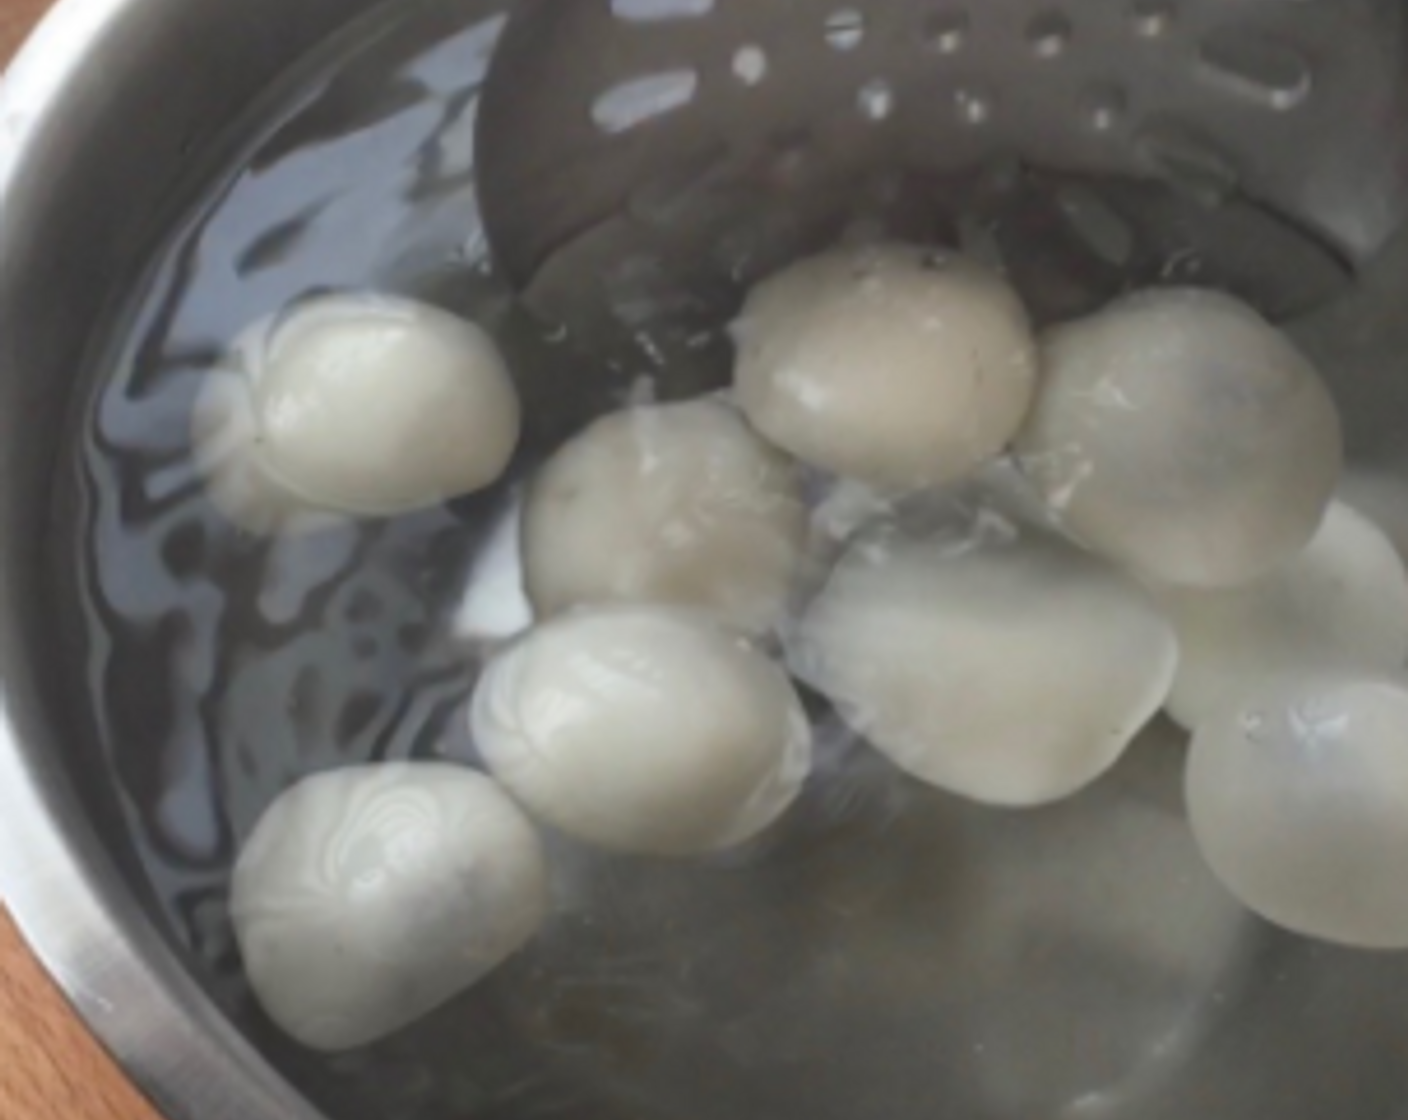 step 25 Sieve out all the cooked glutinous rice balls and place them into a bowl of cold water for about 1 minute. This process will make the rice balls more chewy.